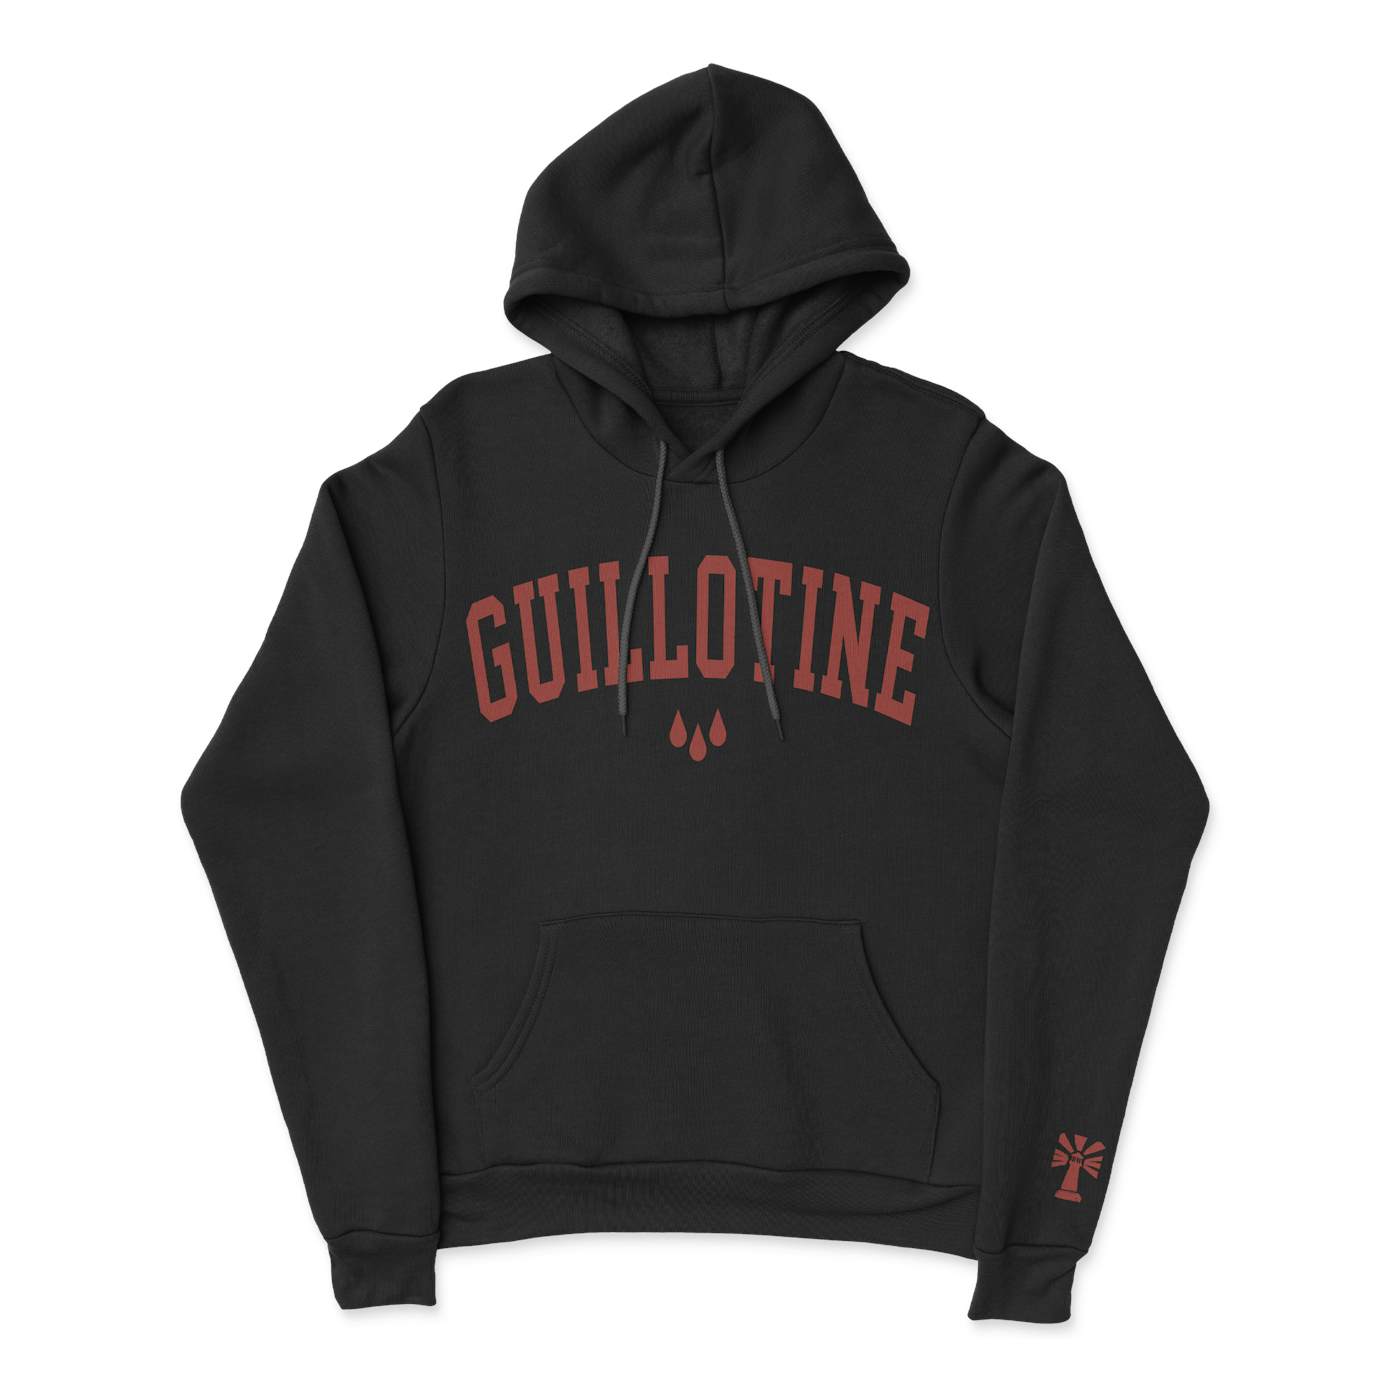 Stray From The Path - Black Guillotine Hoodie w/Embroidered Sleeve